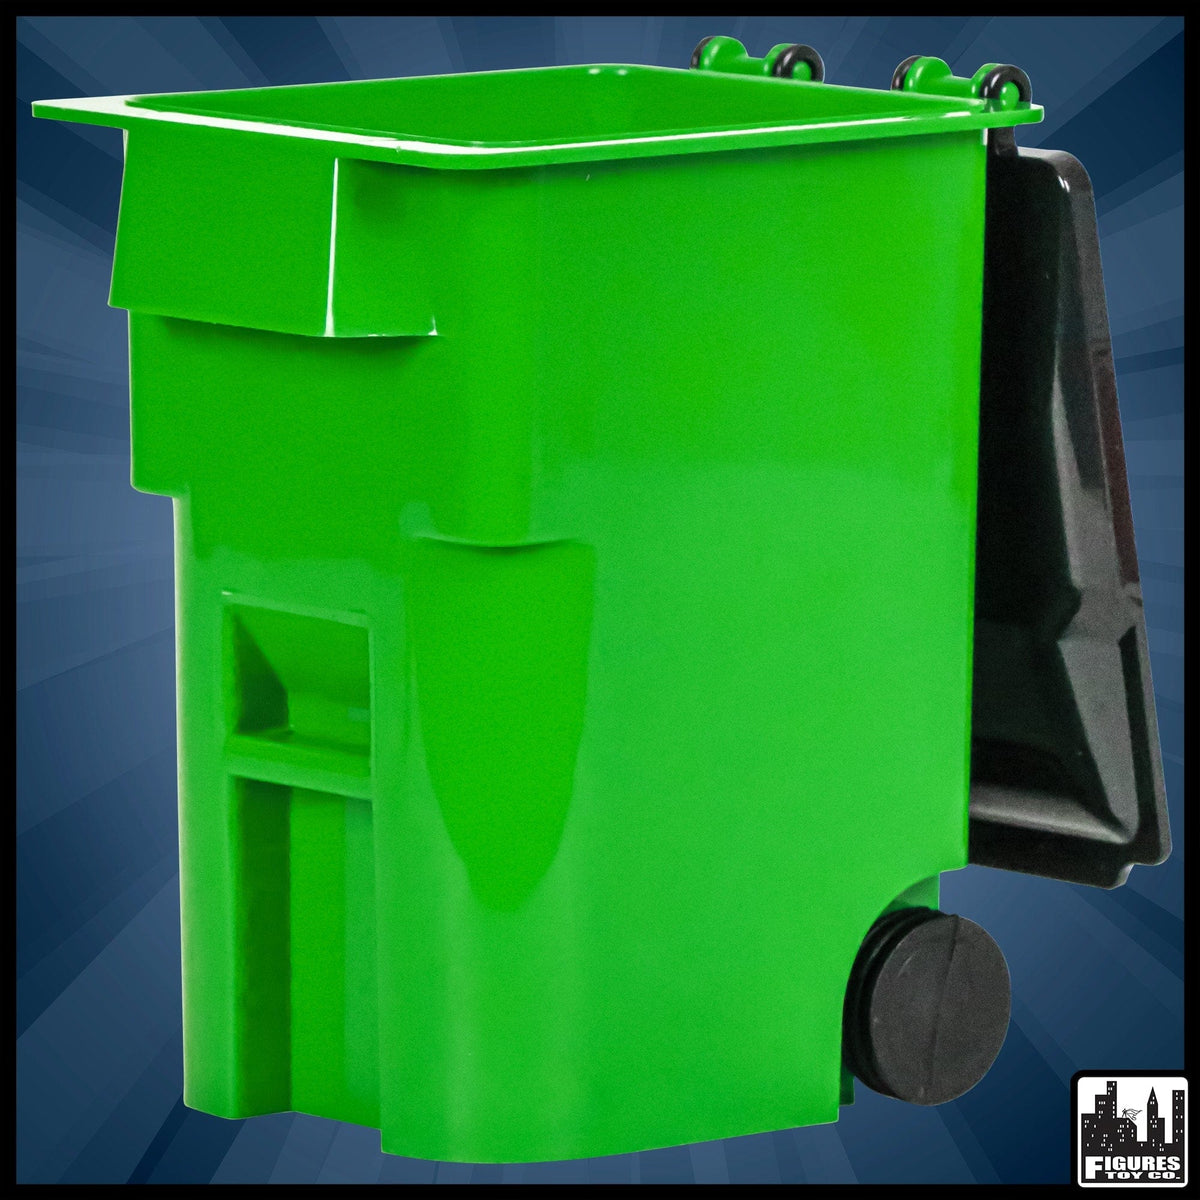 Green Dumpster &amp; 3 Green Trash Cans With Lid &amp; Wheels for WWE Wrestling Action Figures